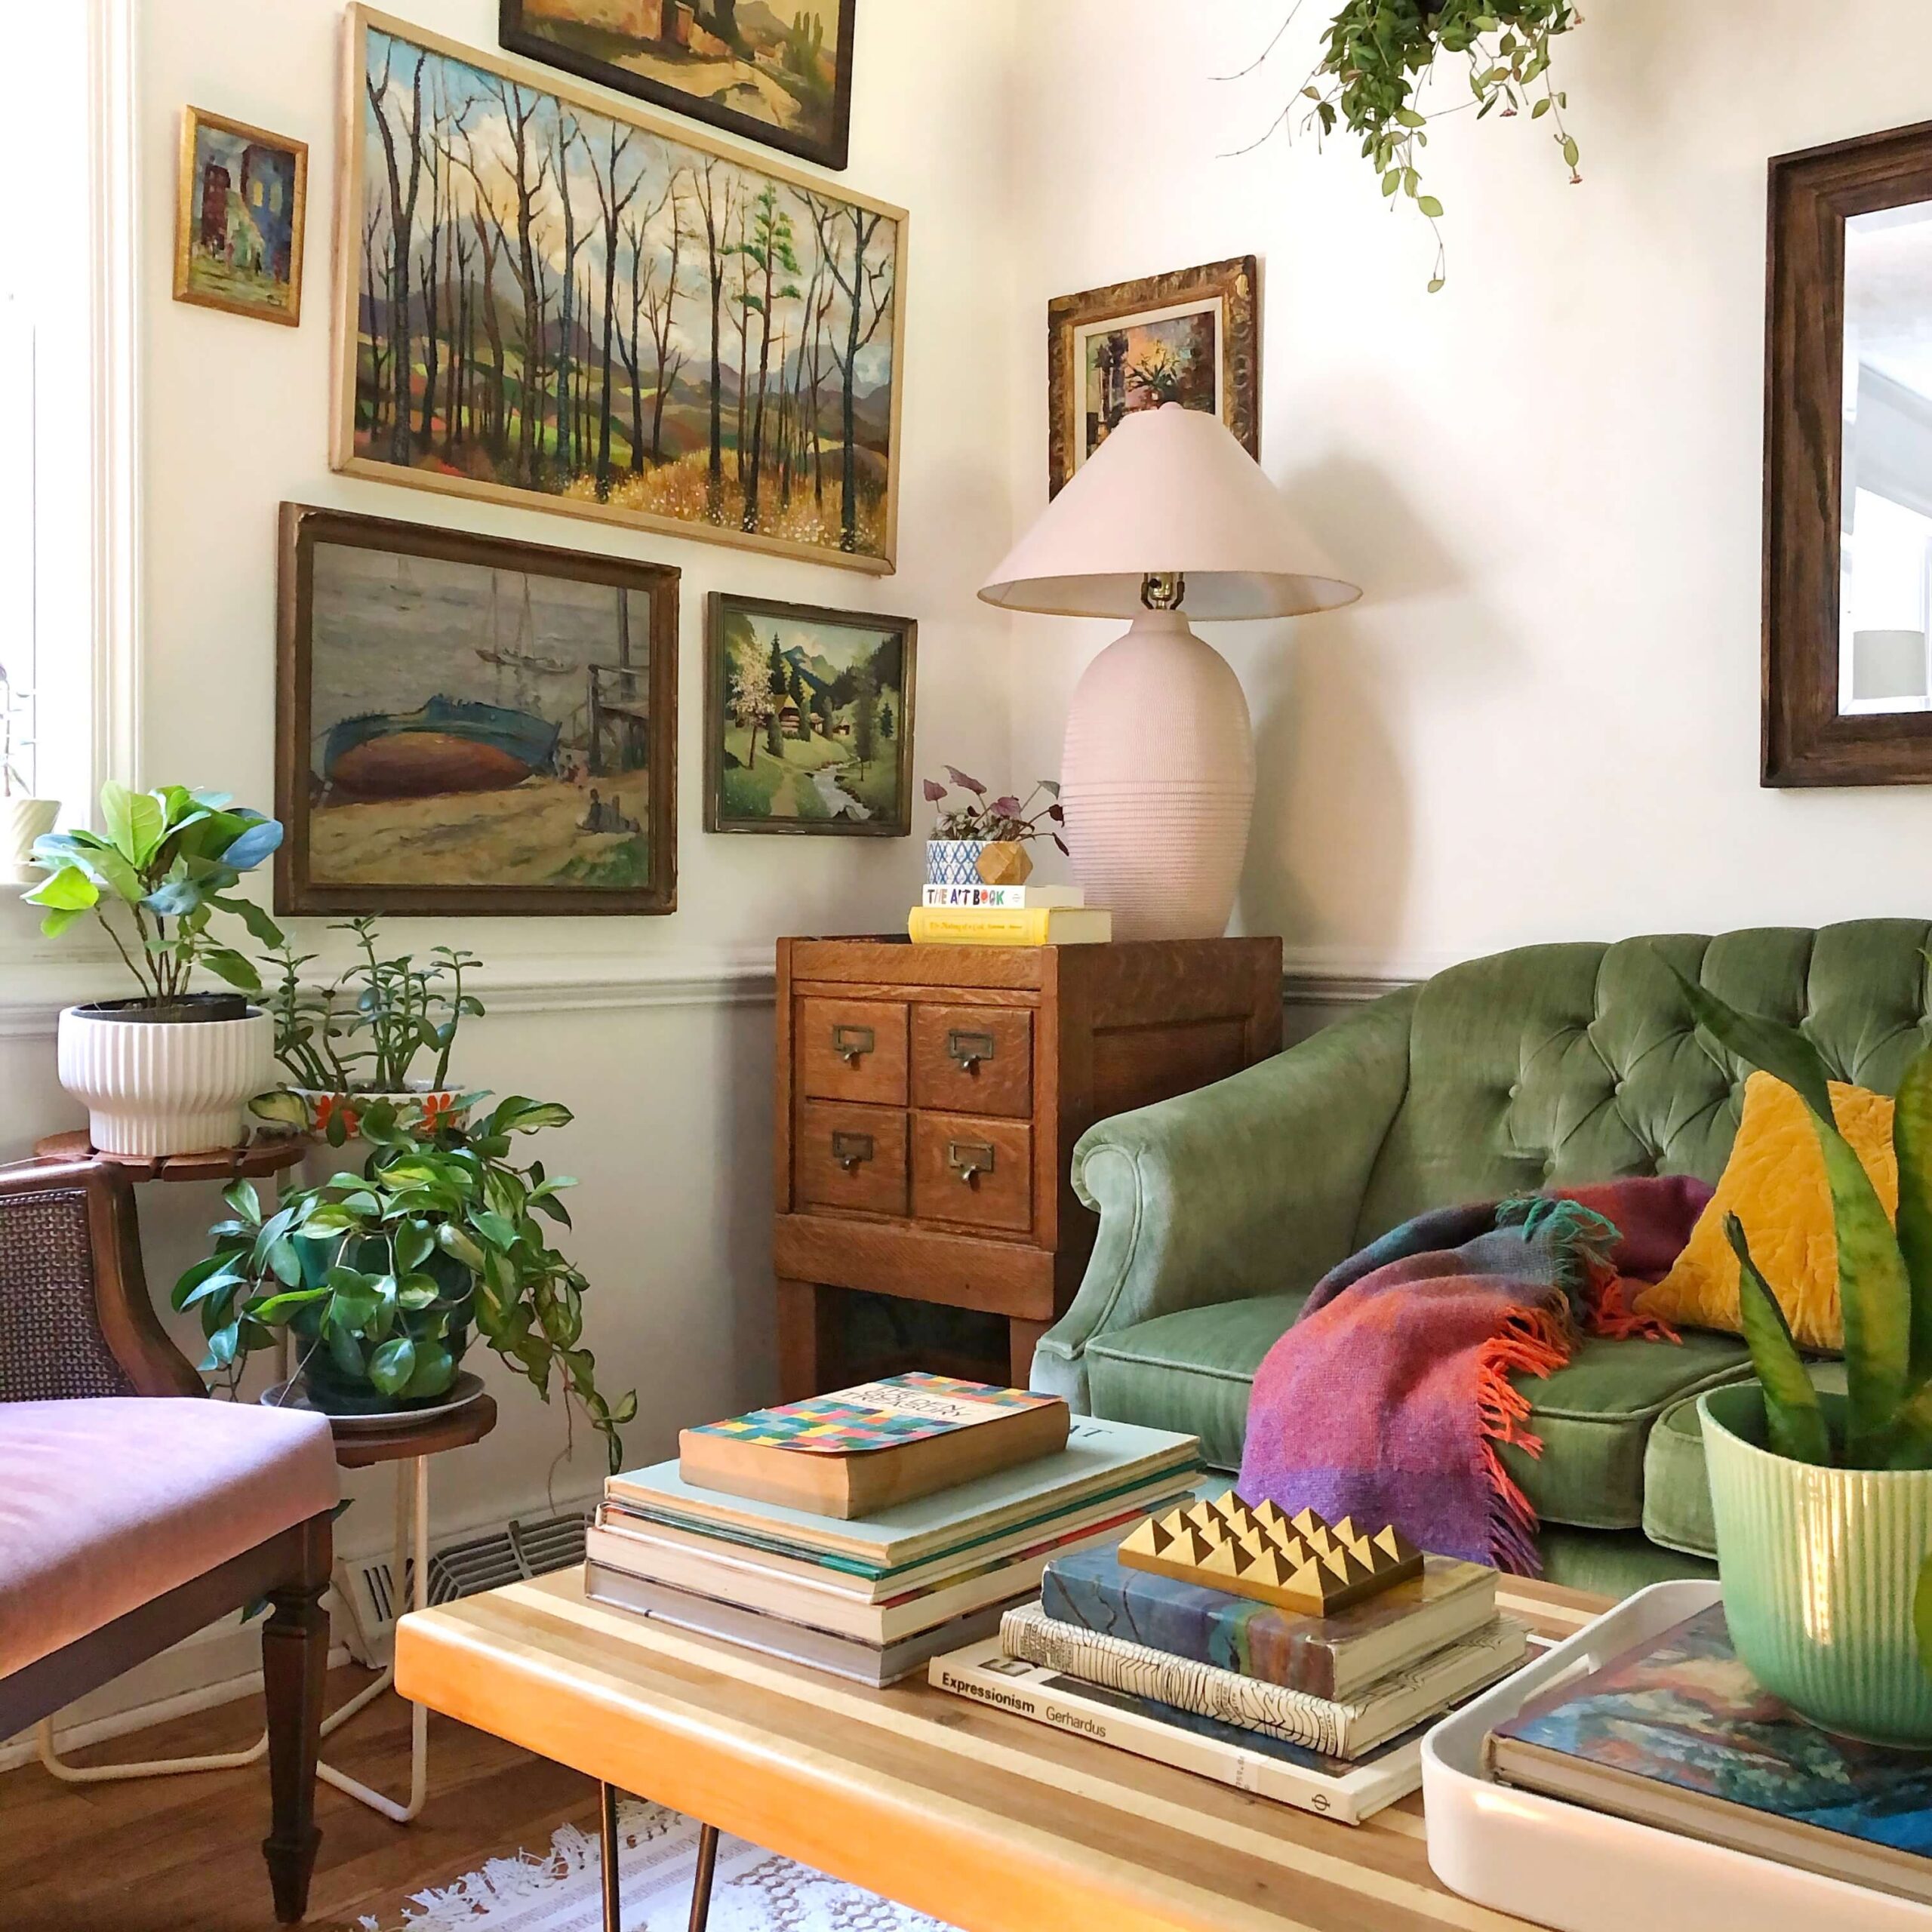 Everything You Need to Know about Selling Vintage Decor Online